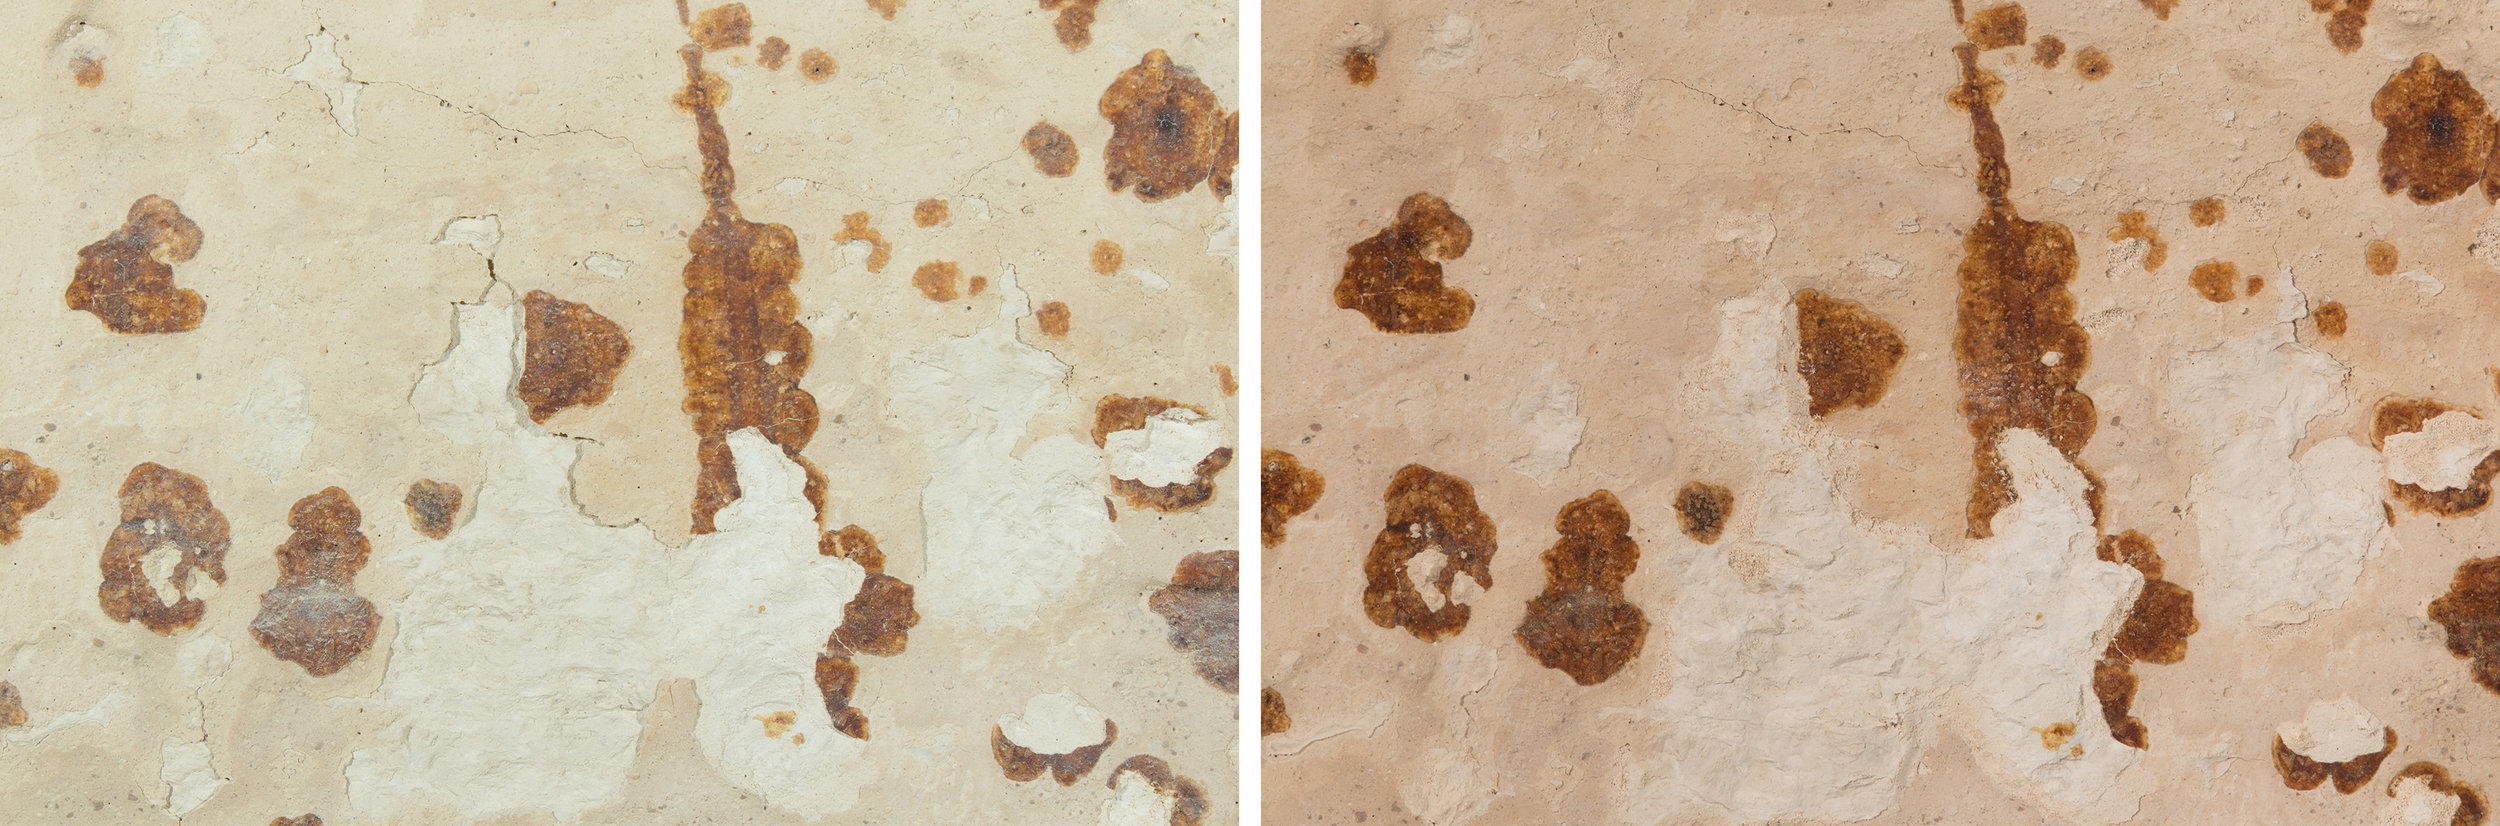  An area of thick flaking is pictured before (left) and after (right) stabilization with a custom bulking adhesive.&nbsp;  Image © J. Paul Getty Trust, 2017 